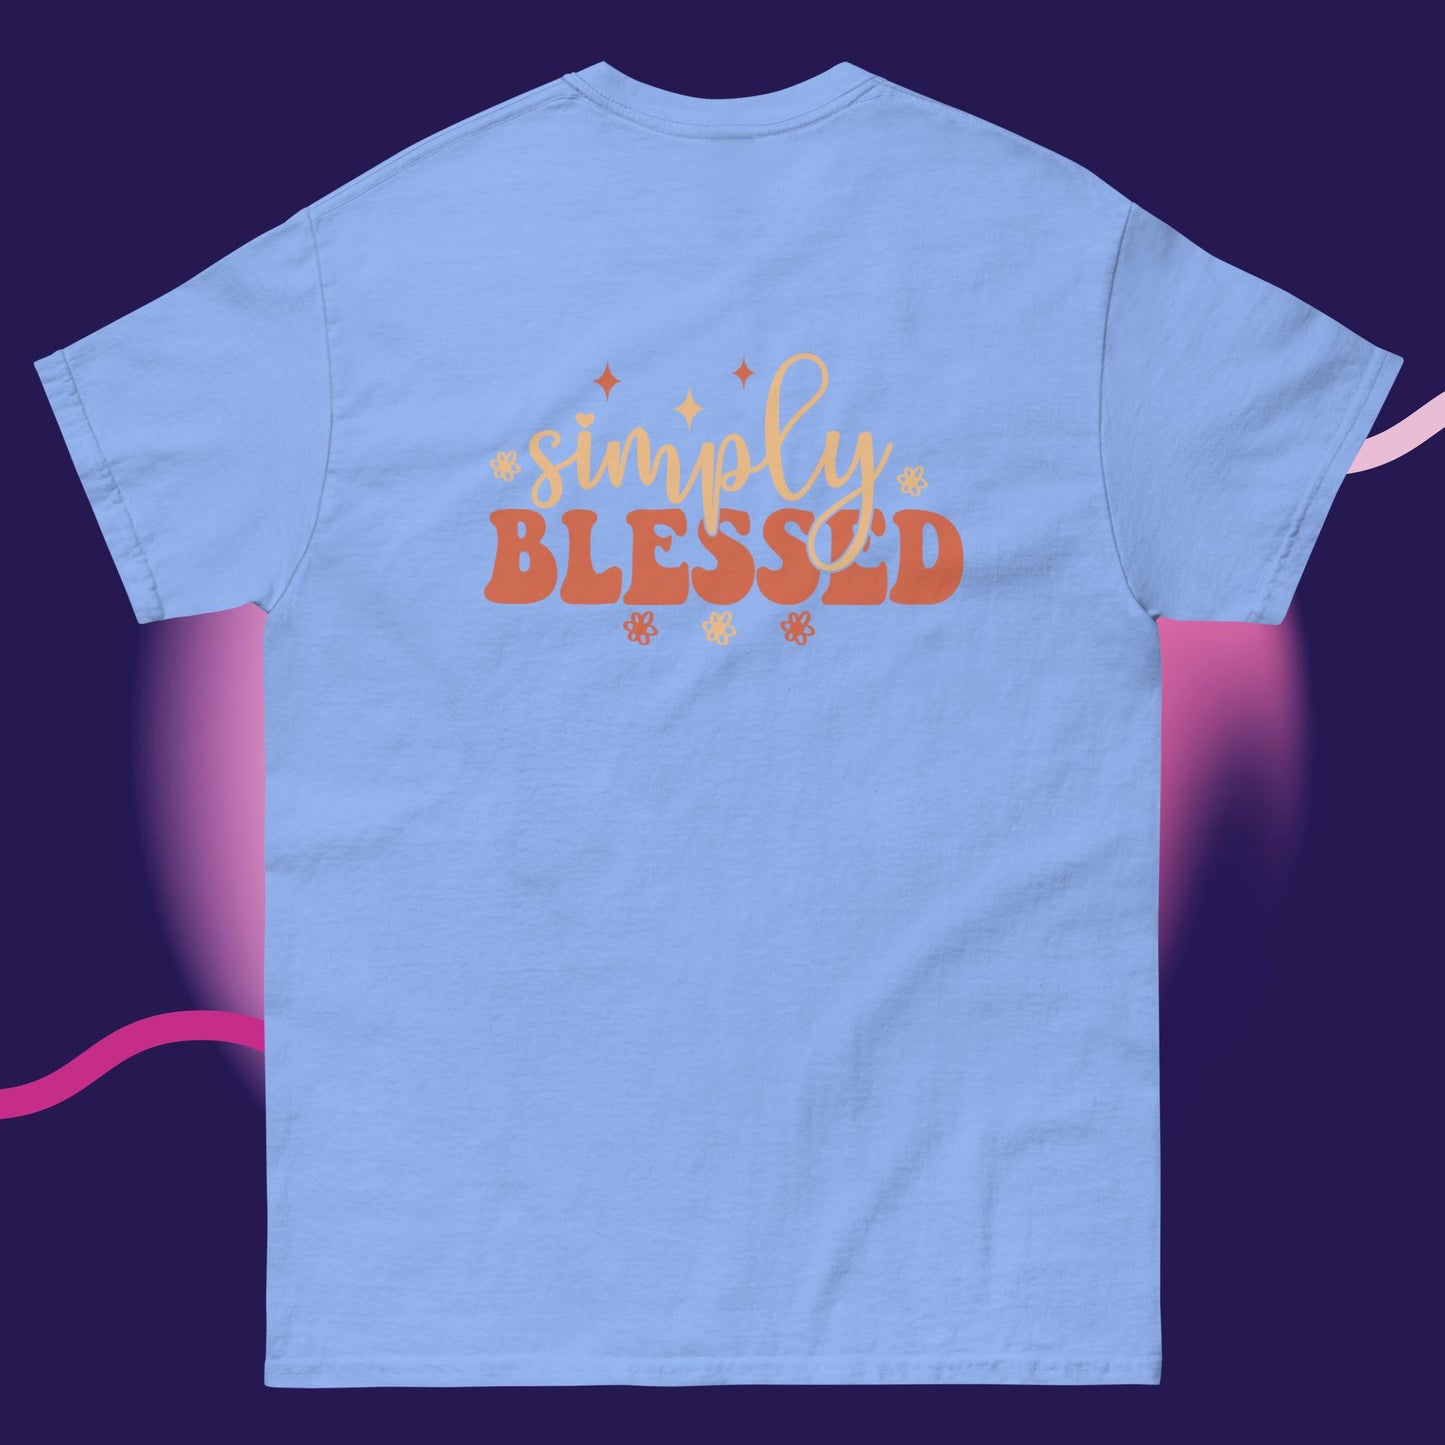 "Simply Blessed" classic tee